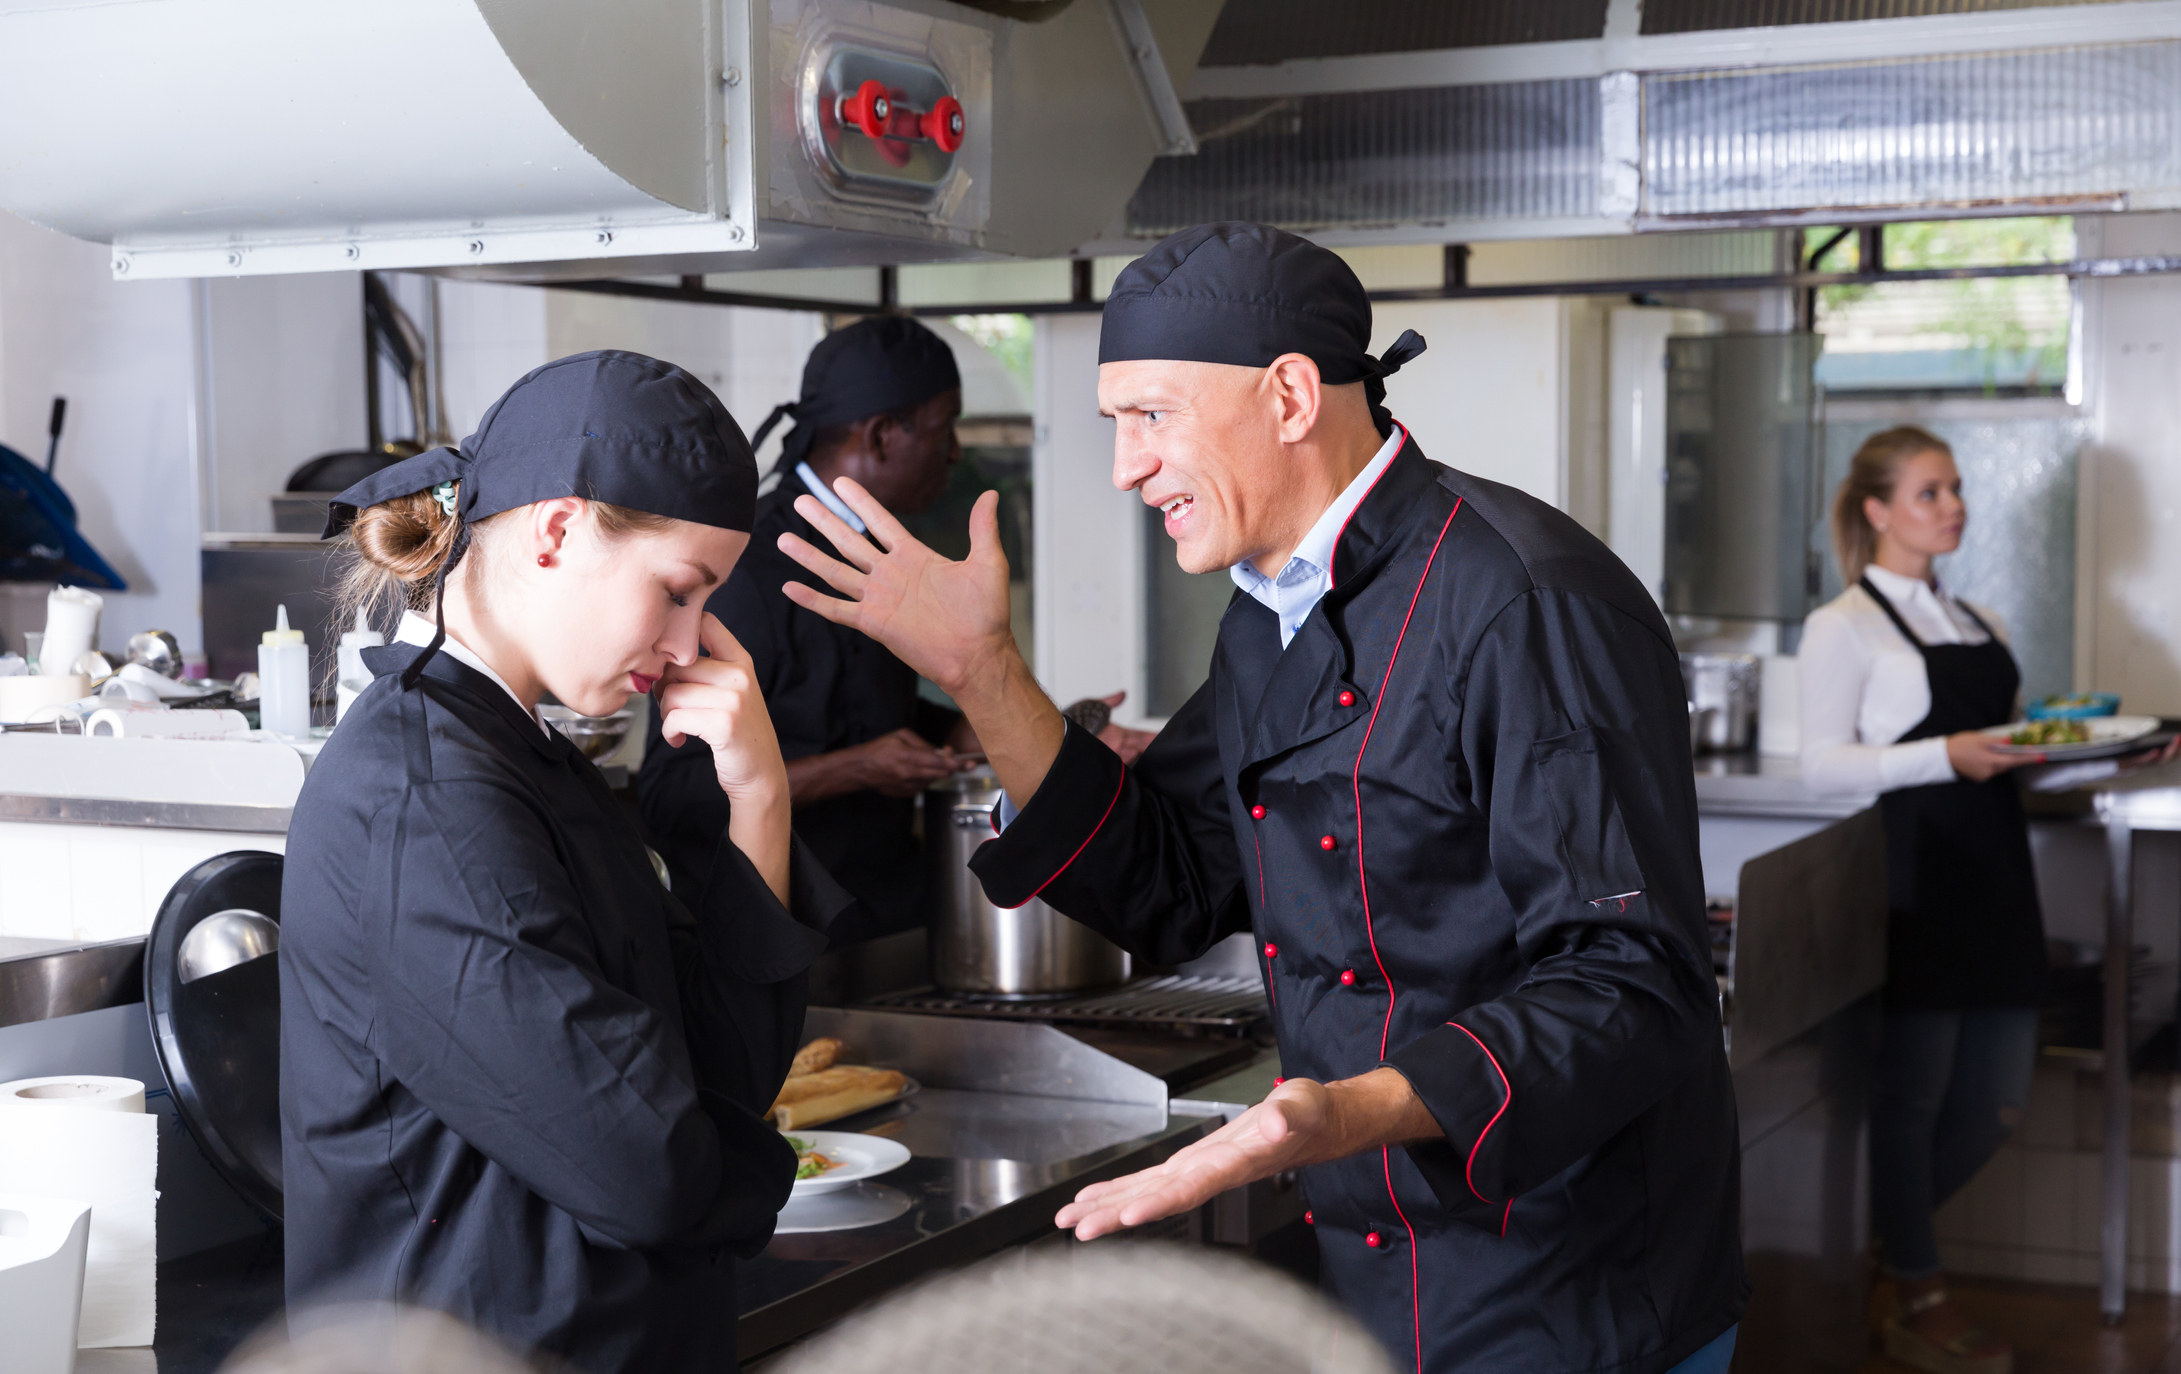 Head chef yelling at another chef in restaurant kitchen